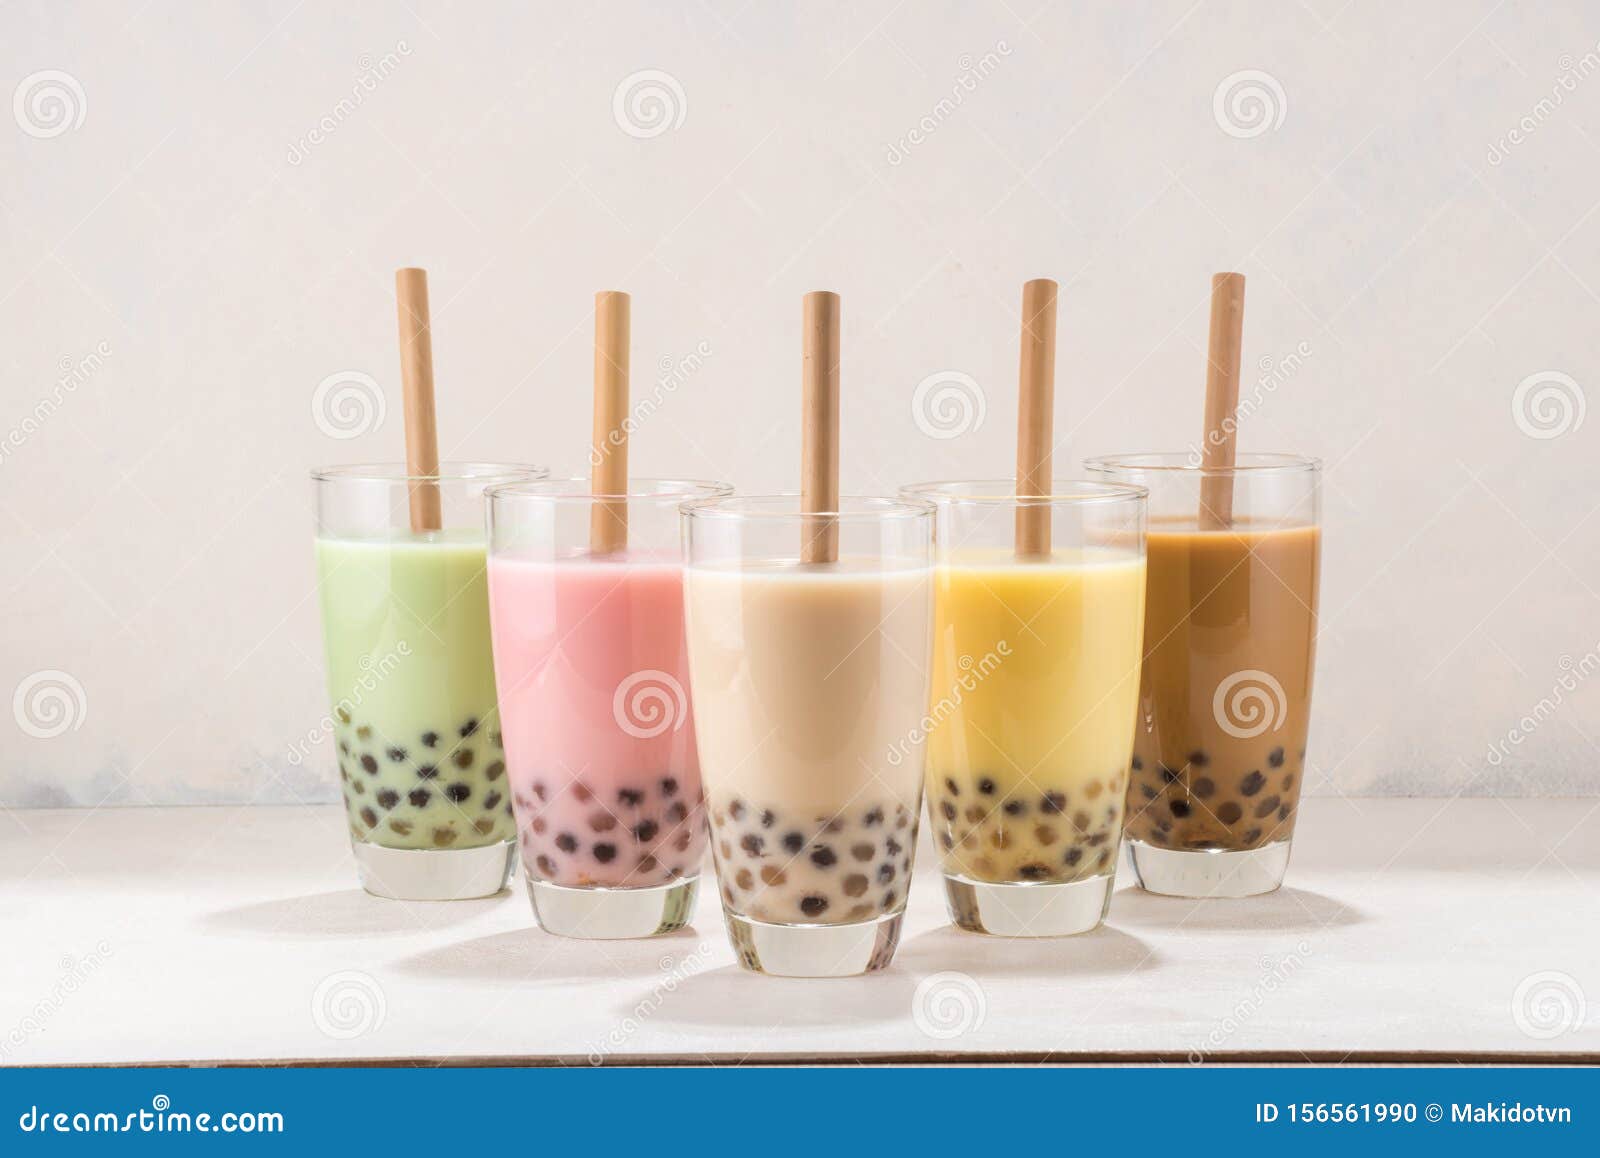 traditional beverage of asia taiwan, glasses of ice buble or boba milk tea  with straw on white background